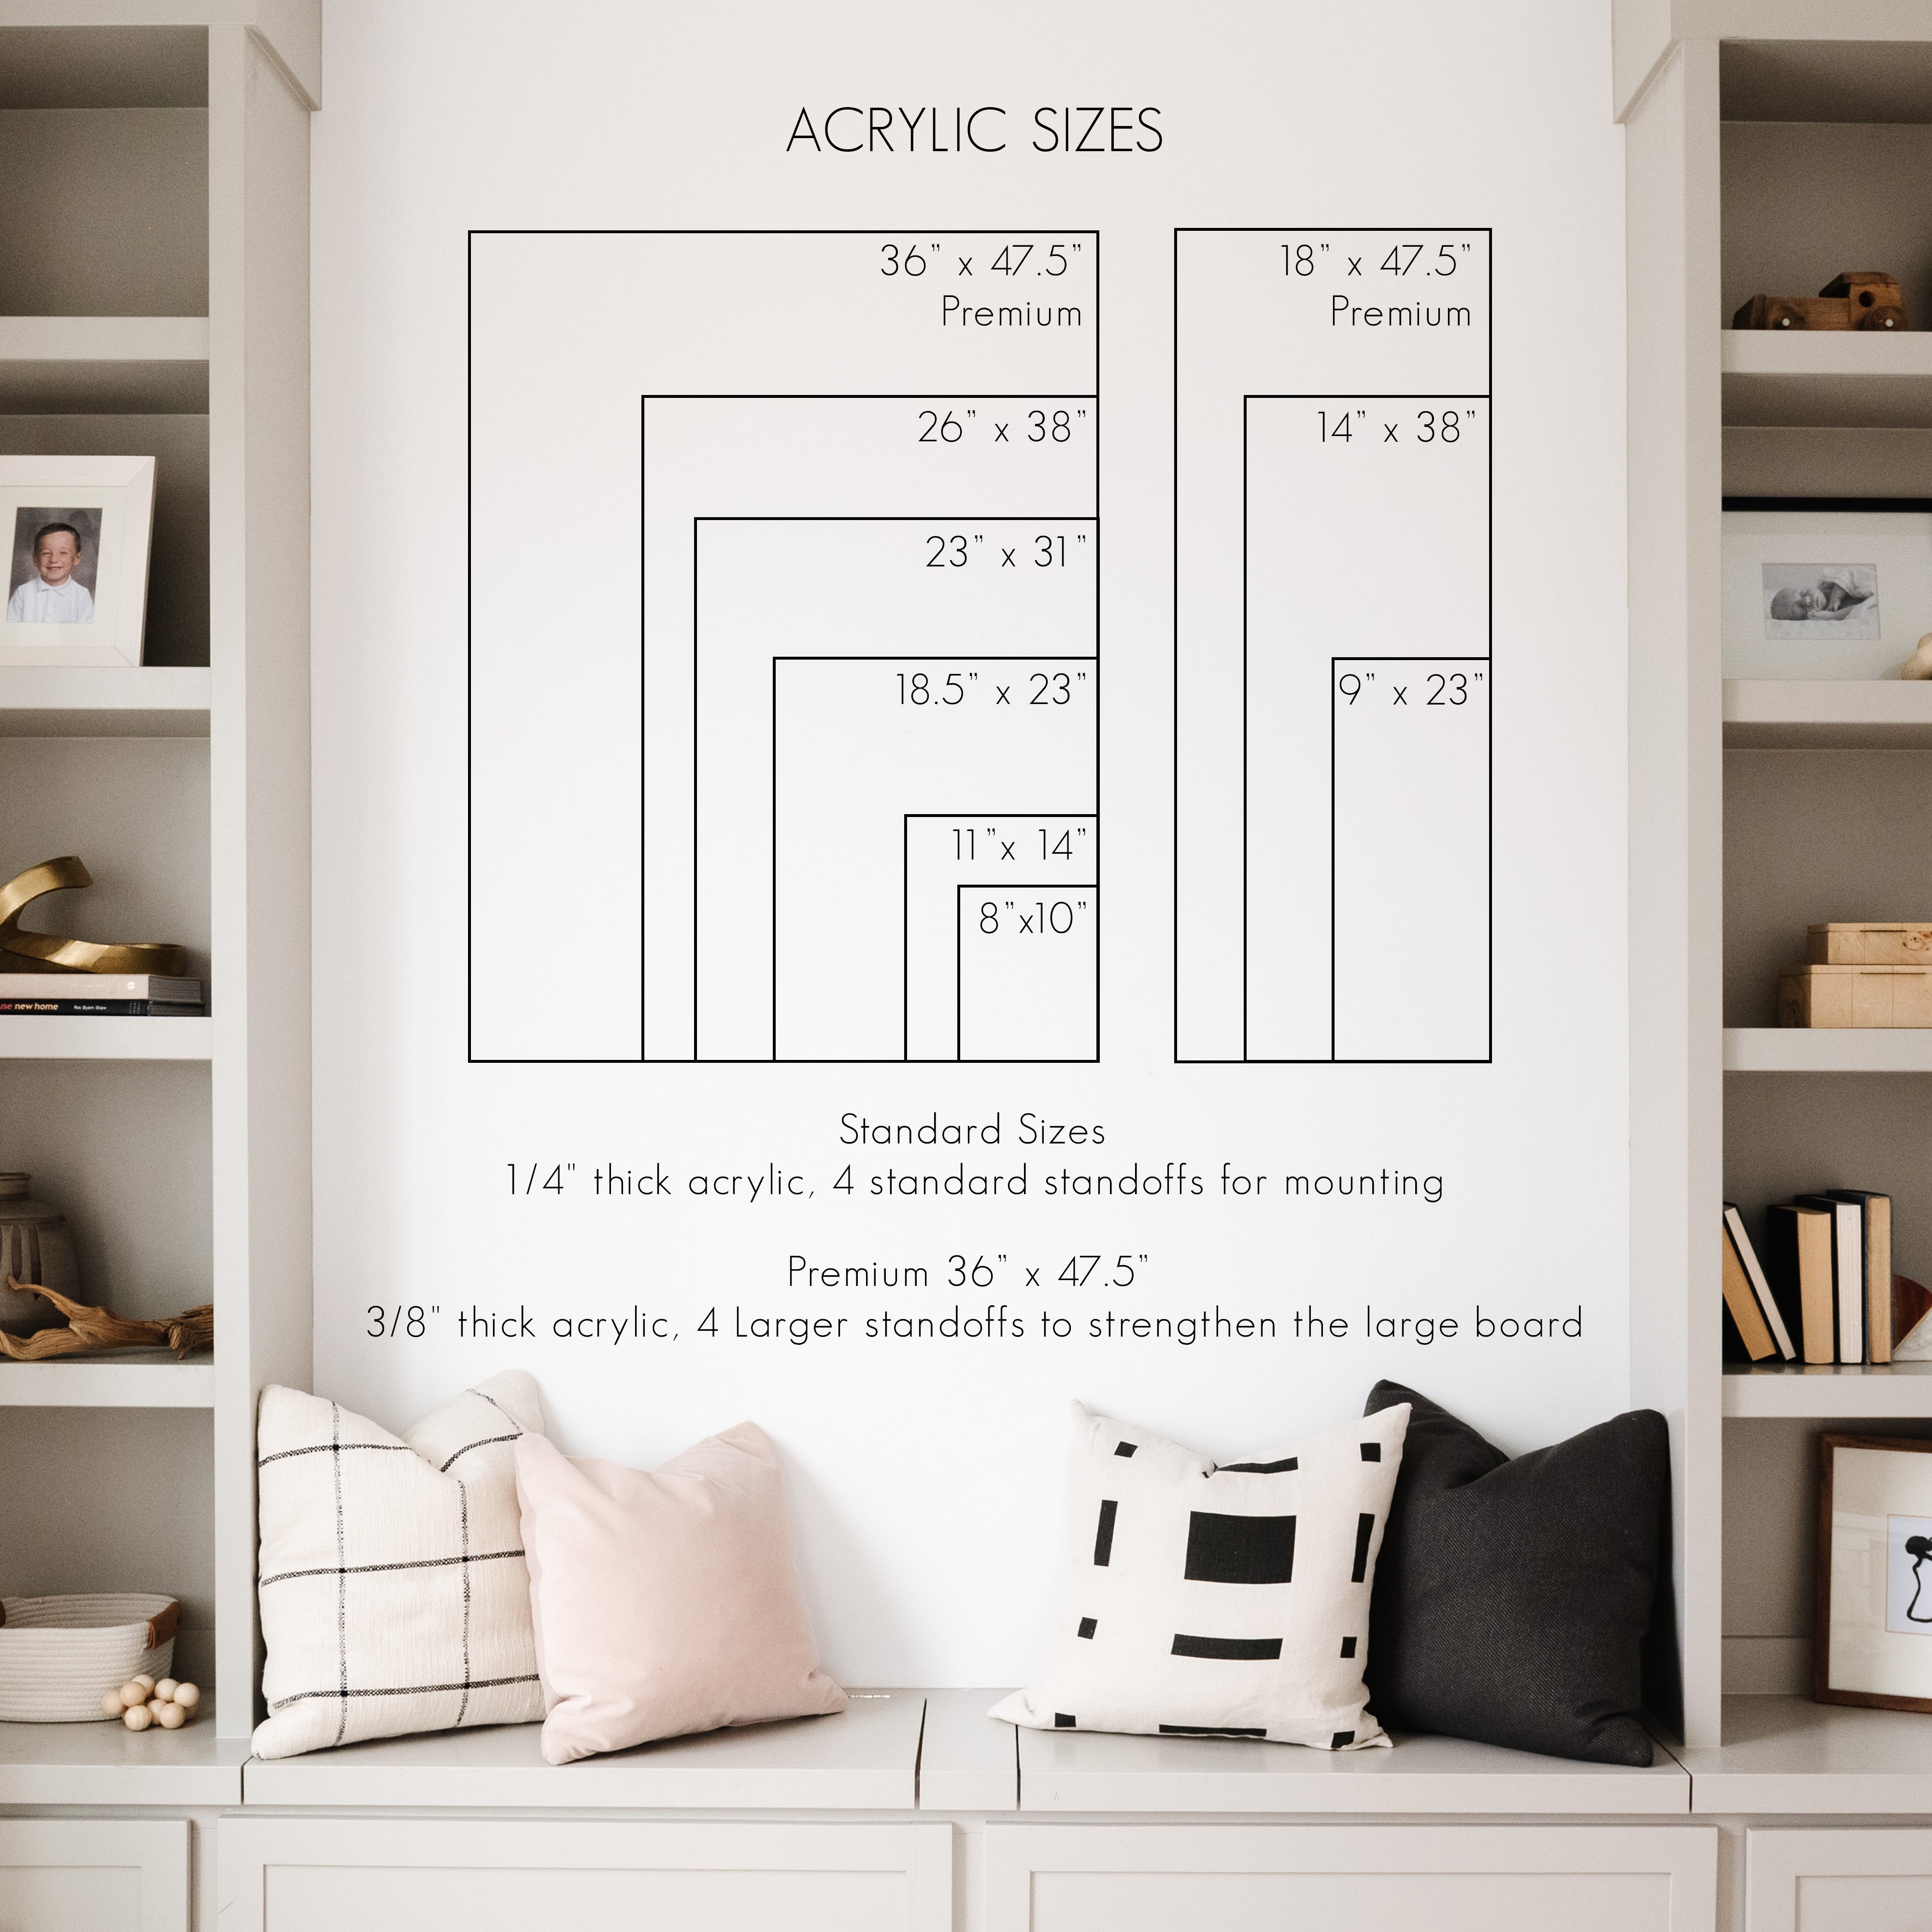 Monthly Frosted Acrylic Calendar + 2 Sections | Vertical Minimalist